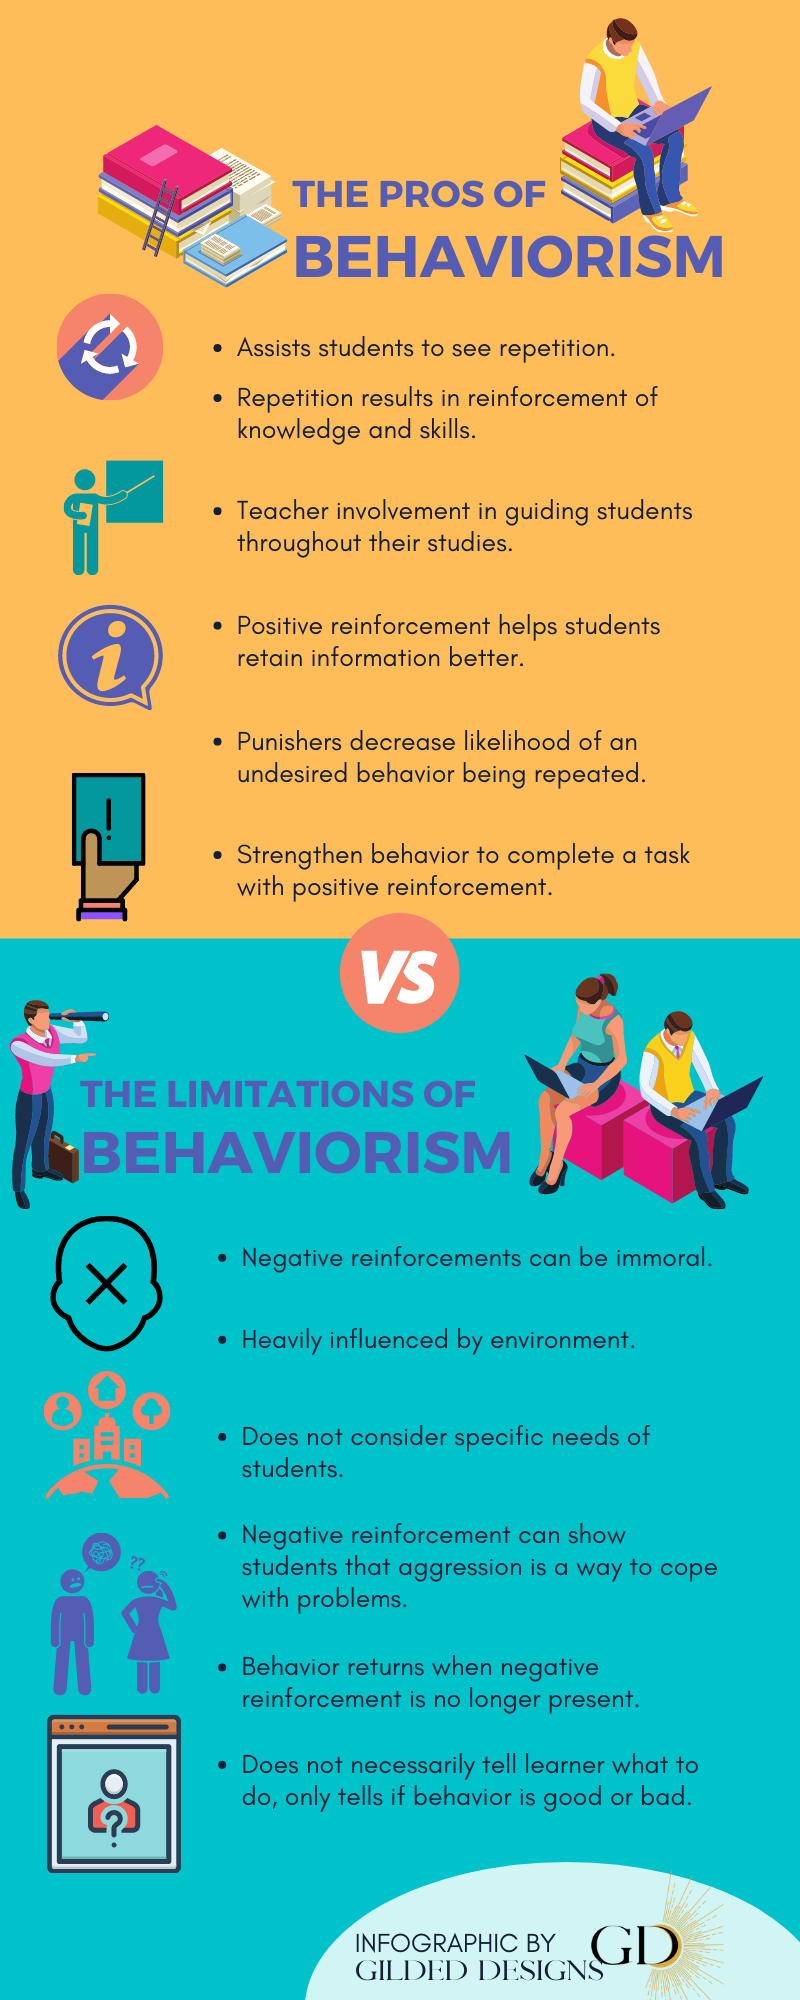 This is an infographic on behaviorism